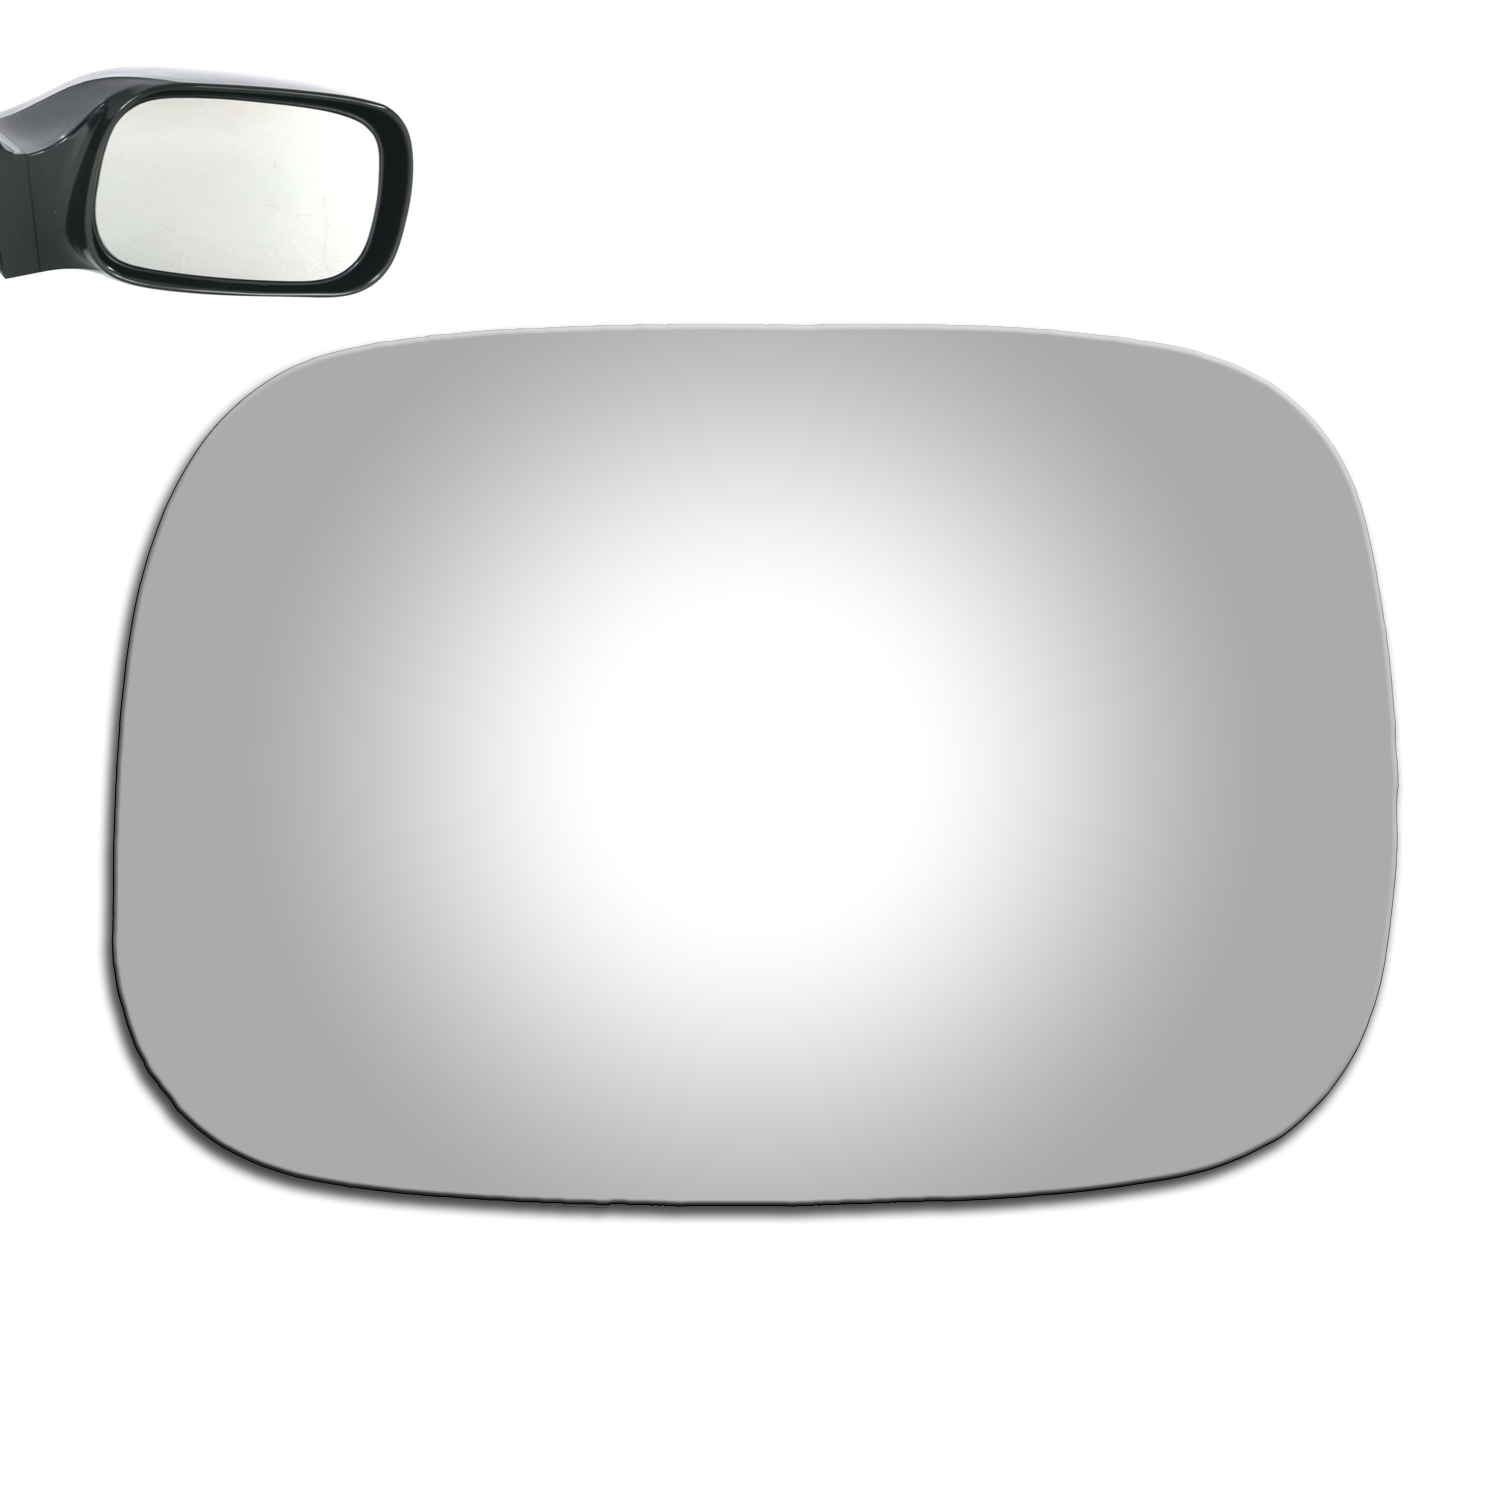 WLLW Replacement Mirror Glass for 2005-2010 Toyota Avalon, Driver Left Side LH/Passenger Right Side RH/The Both Sides Flat Convex M-0084